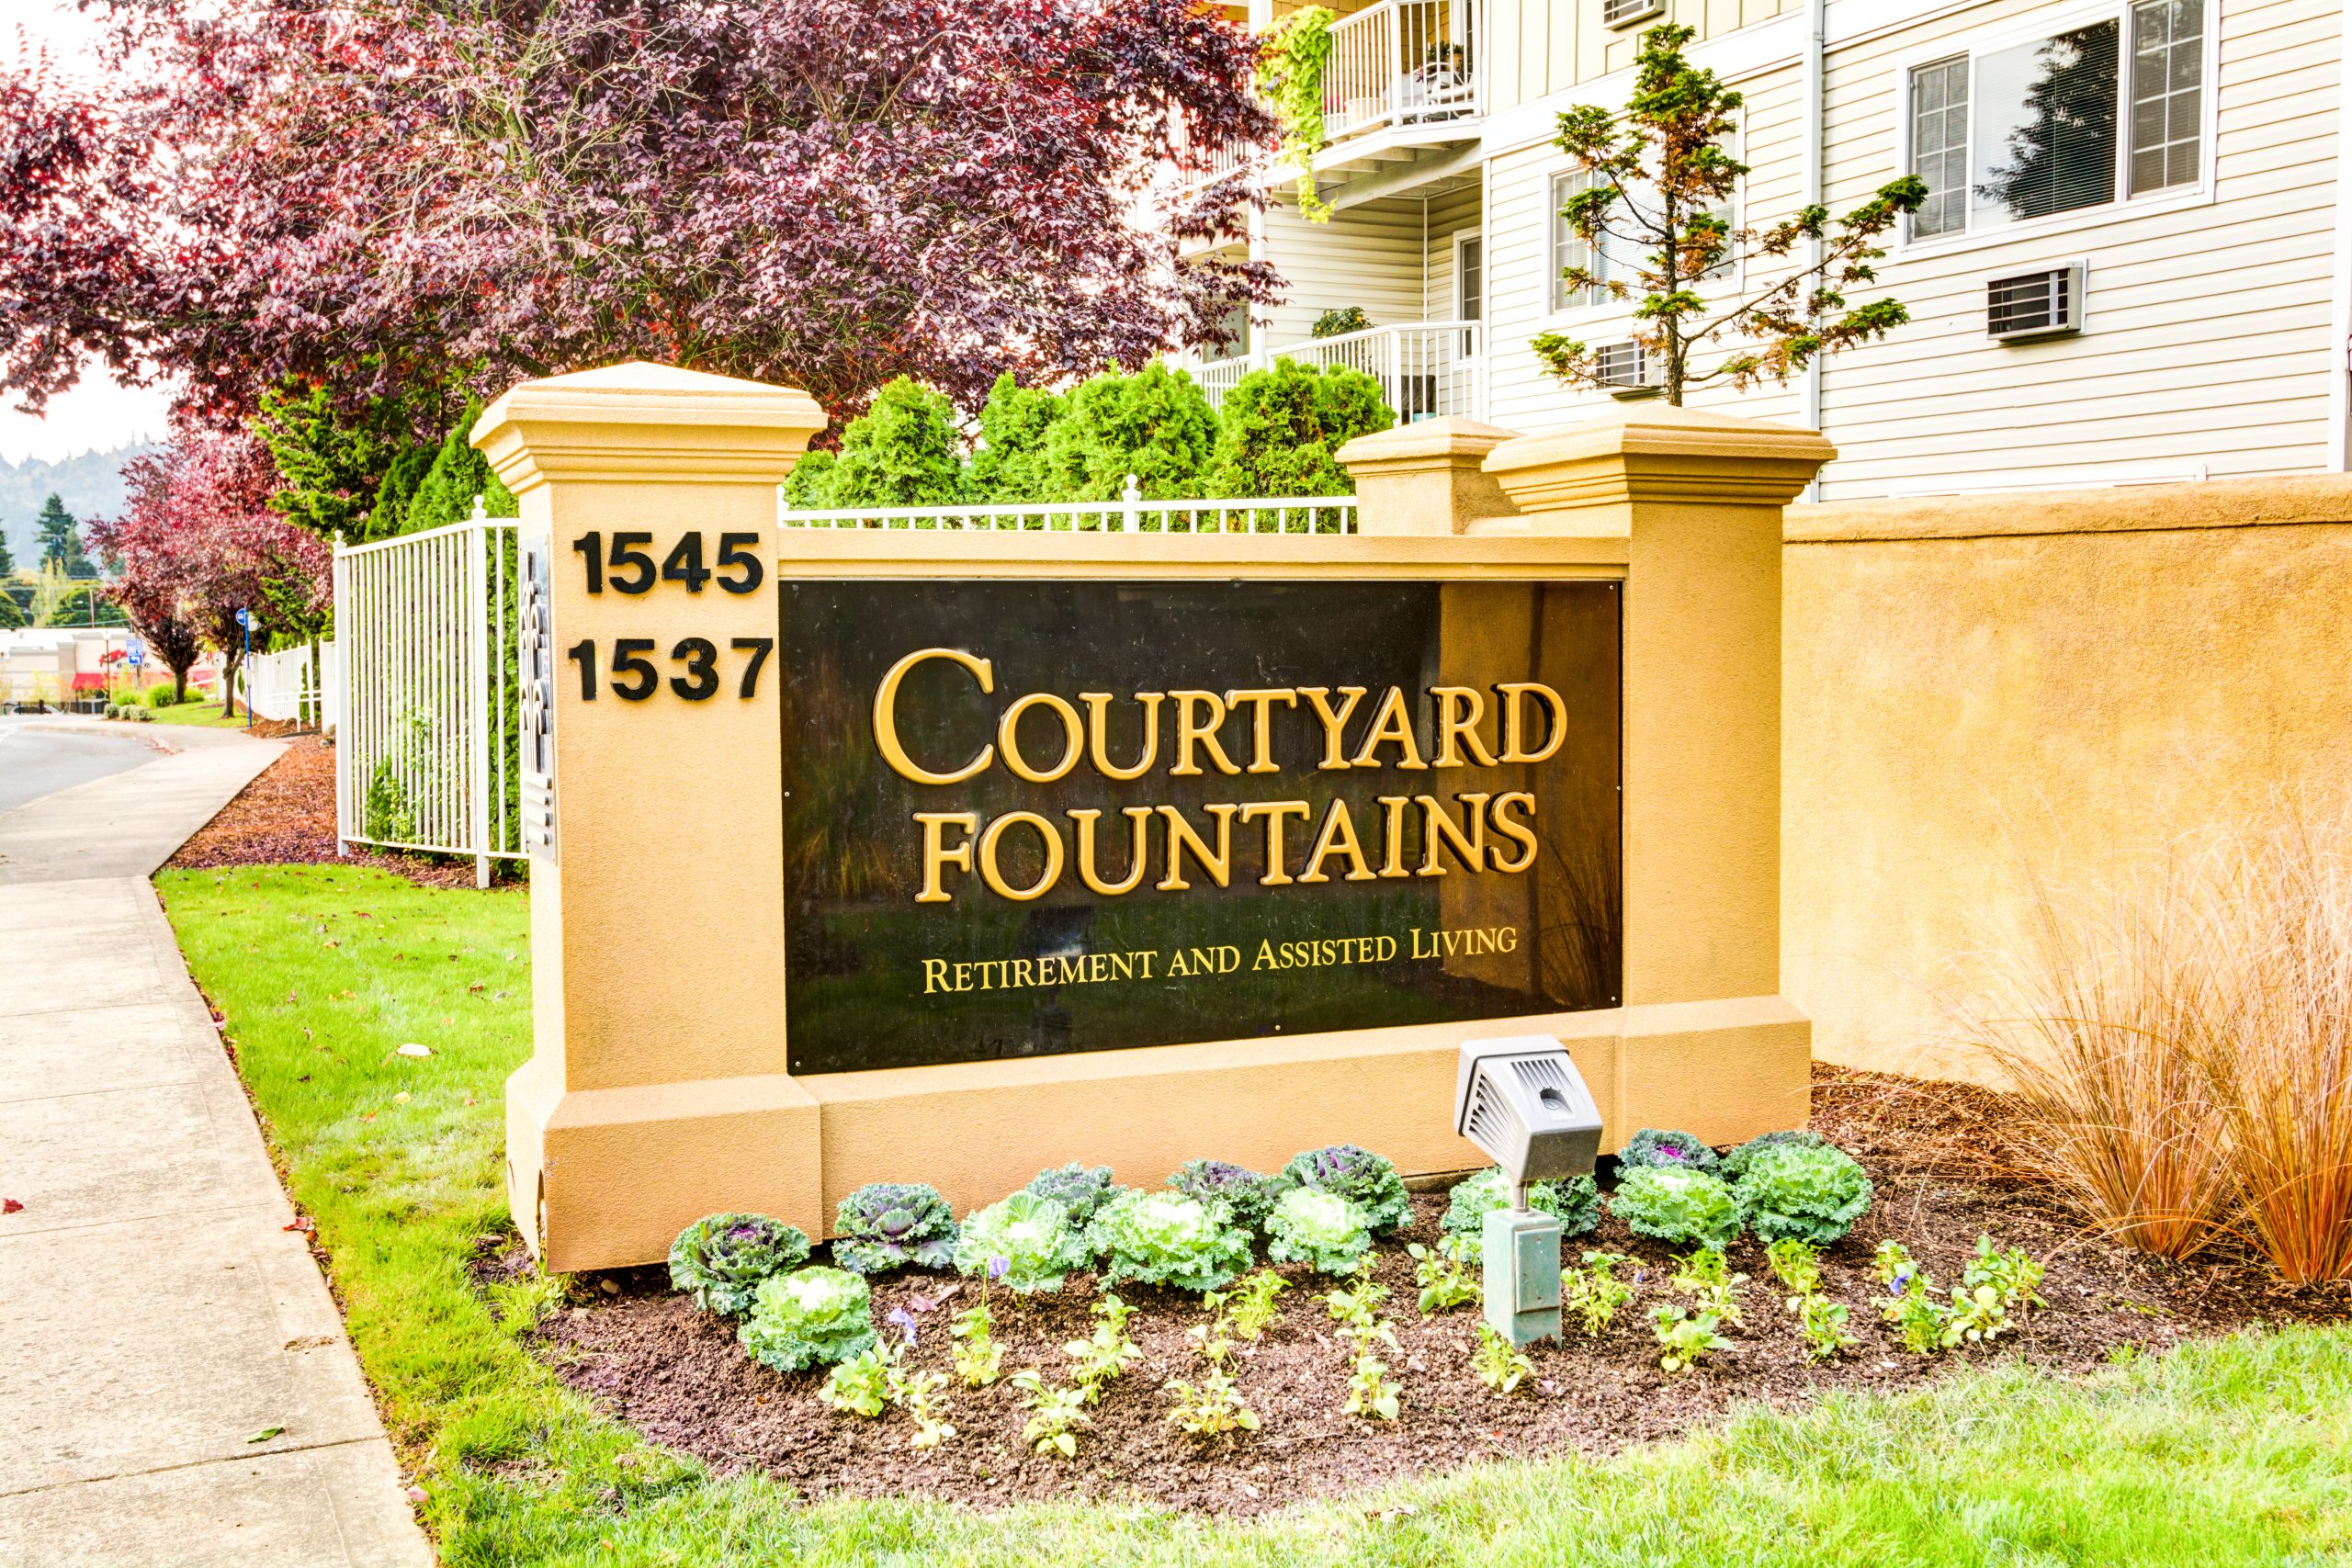 Courtyard fountains outdoor signage